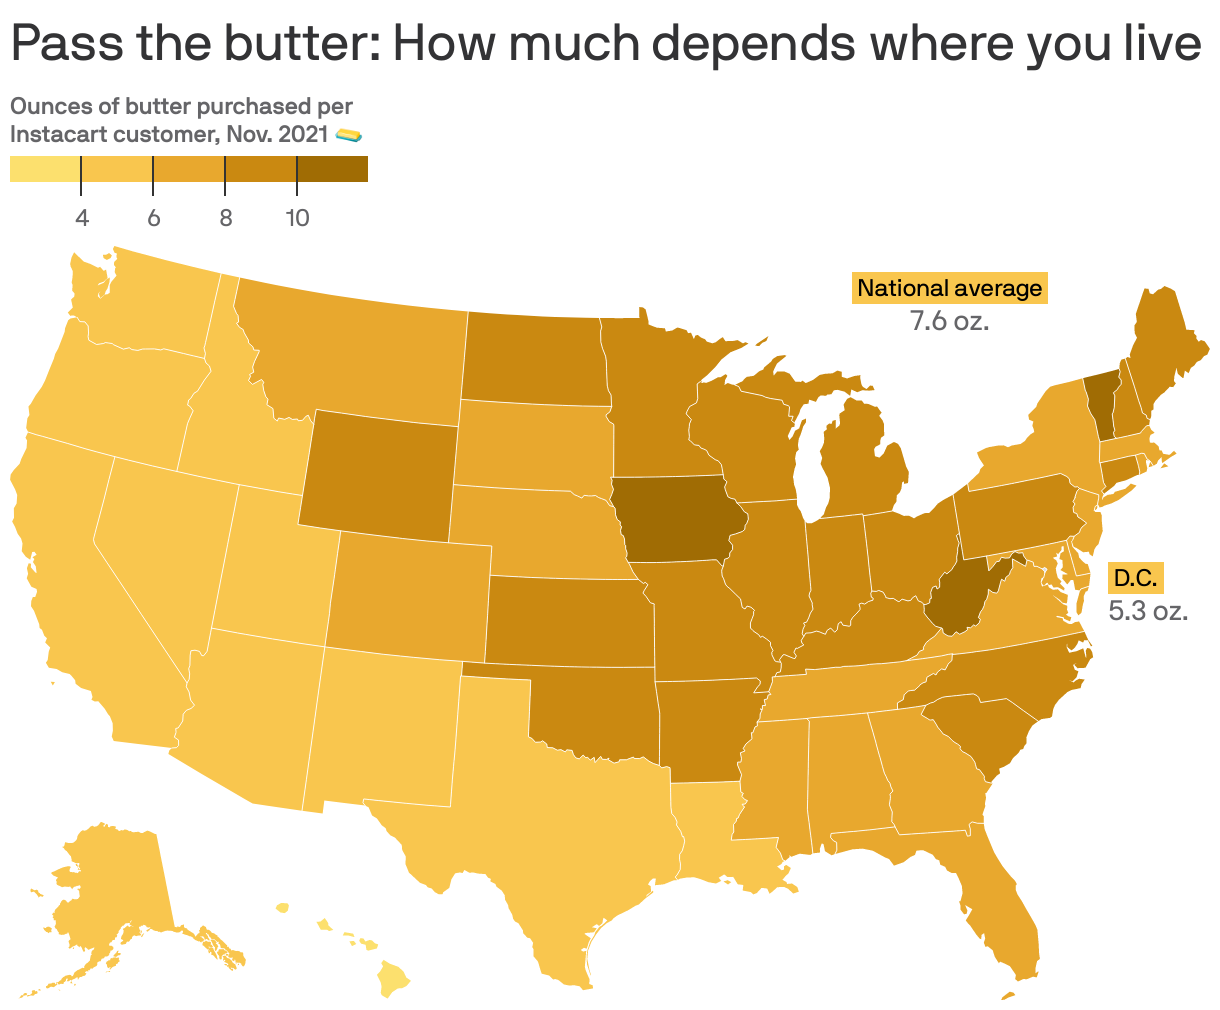 Pass the butter: How much depends where you live